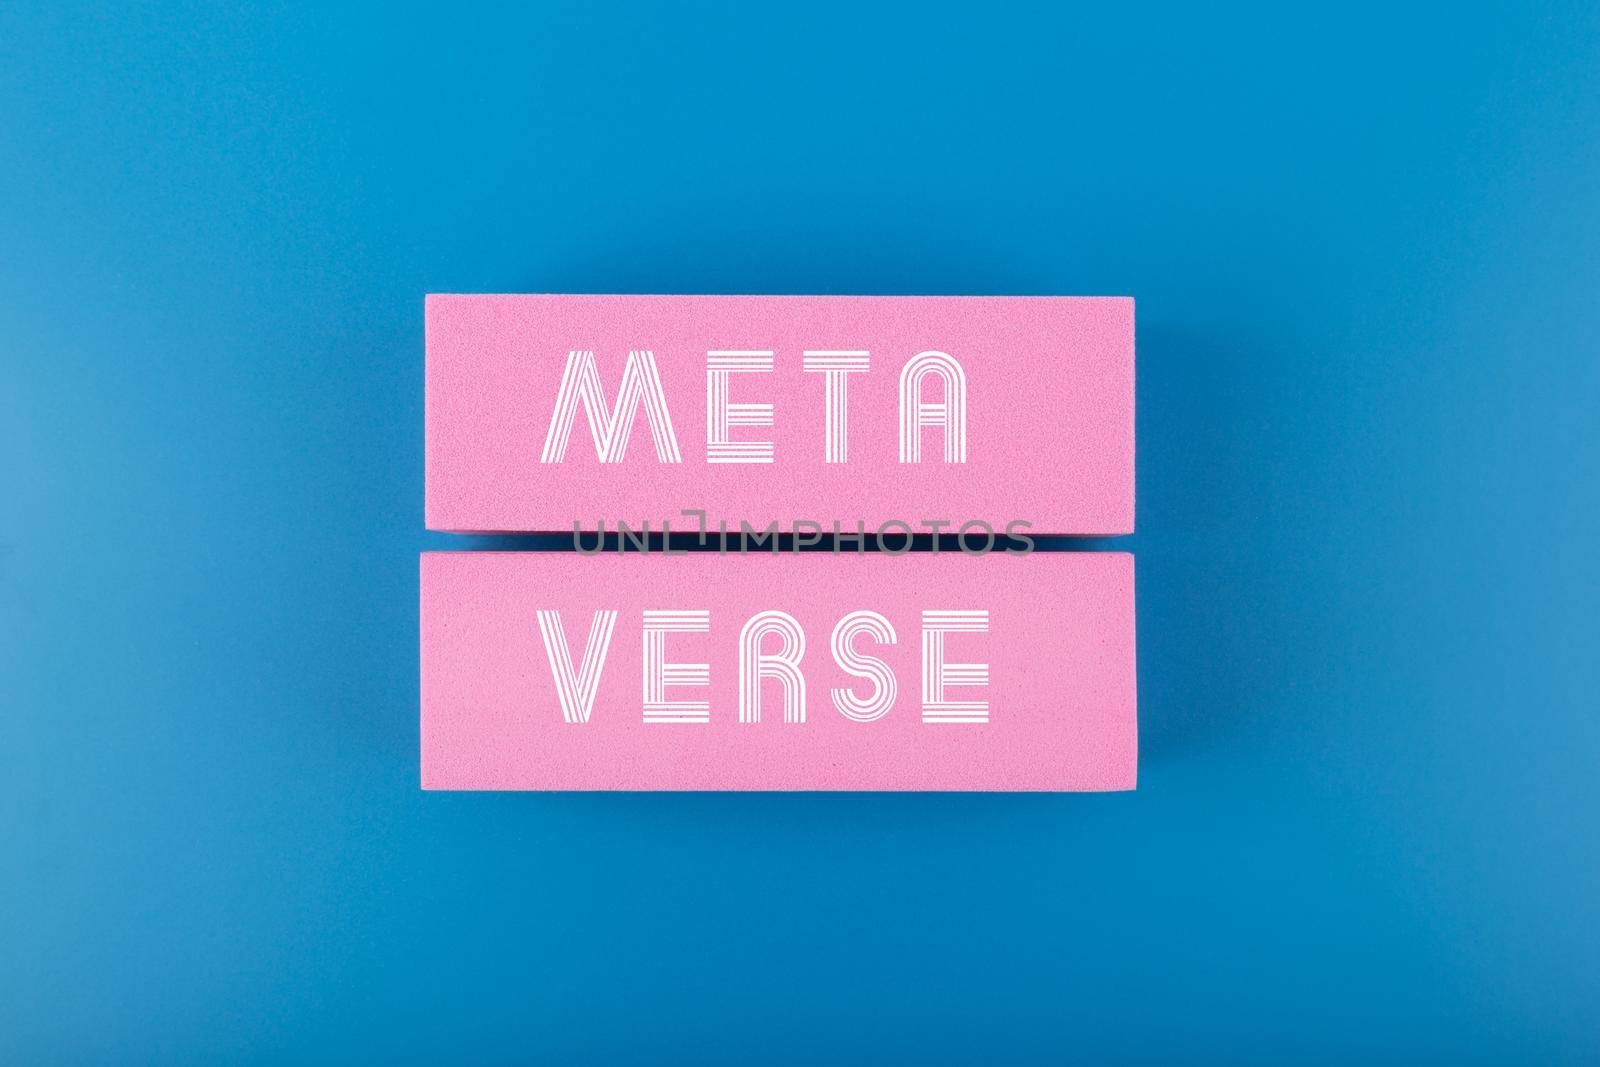 Metaverse modern minimal concept in blue colors. Written metaverse single word on two pink rectangles against dark blue background. Future computer technologies.